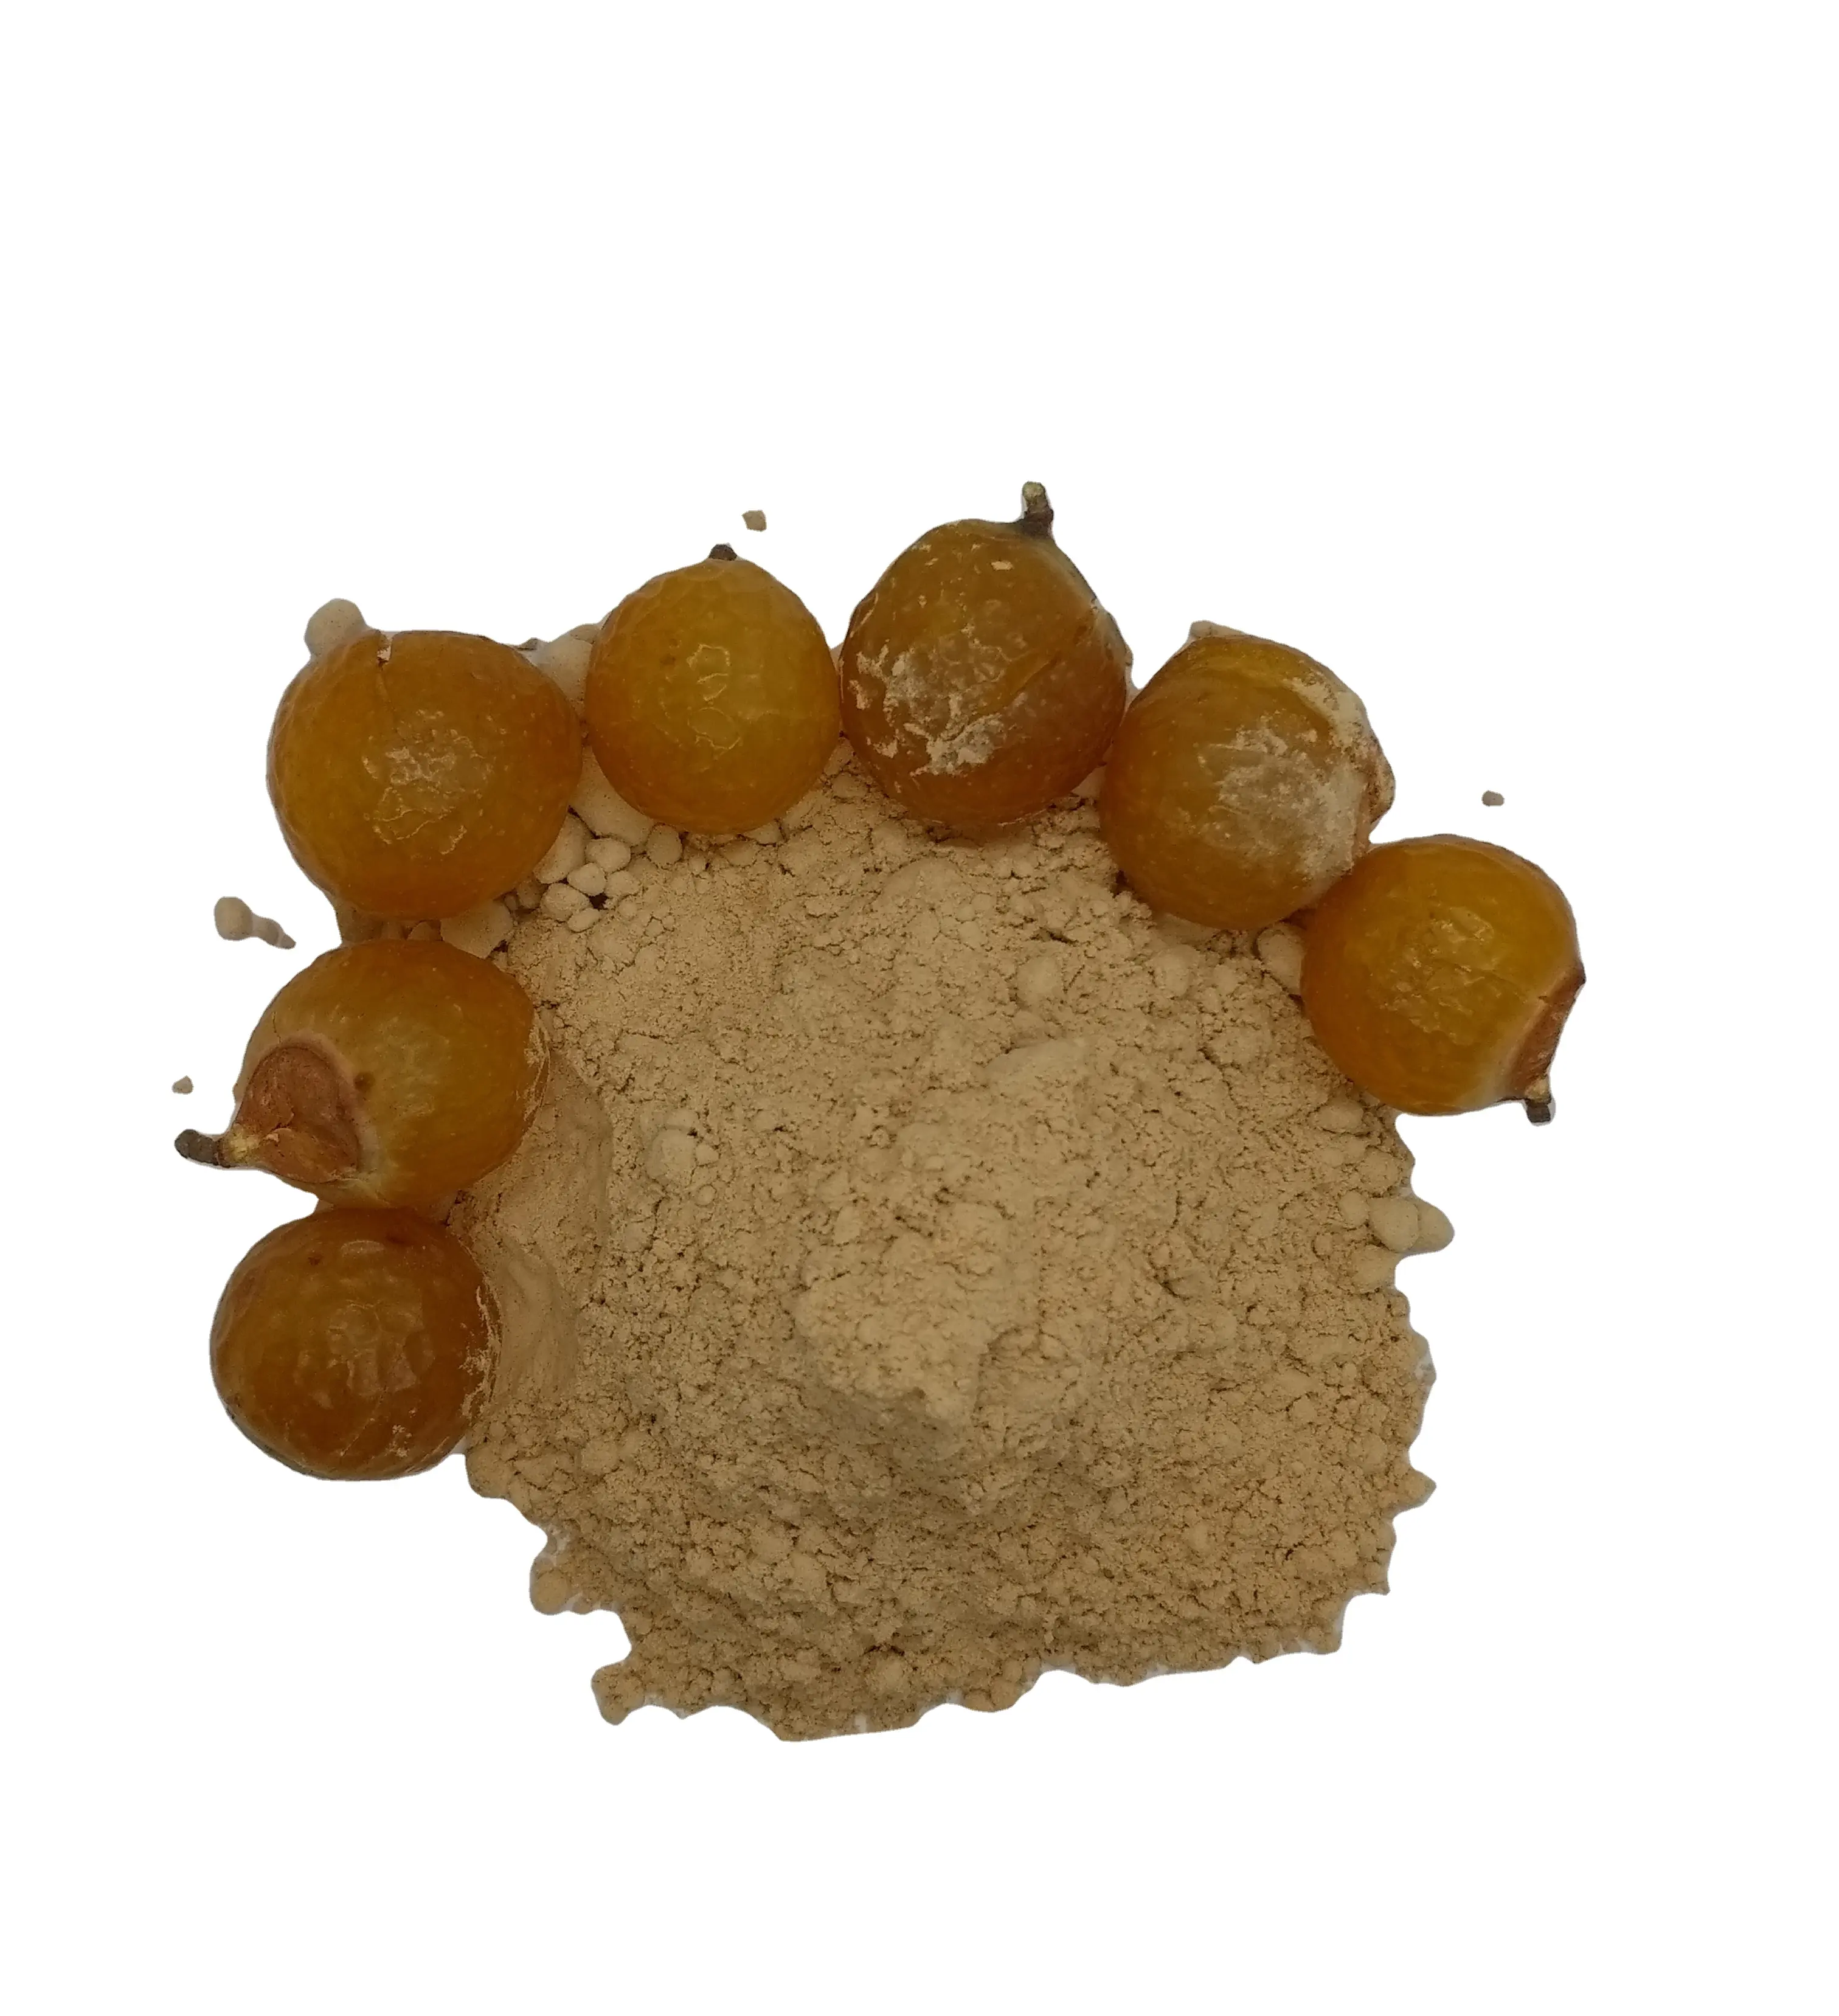 100% Pure Reetha Powder from India